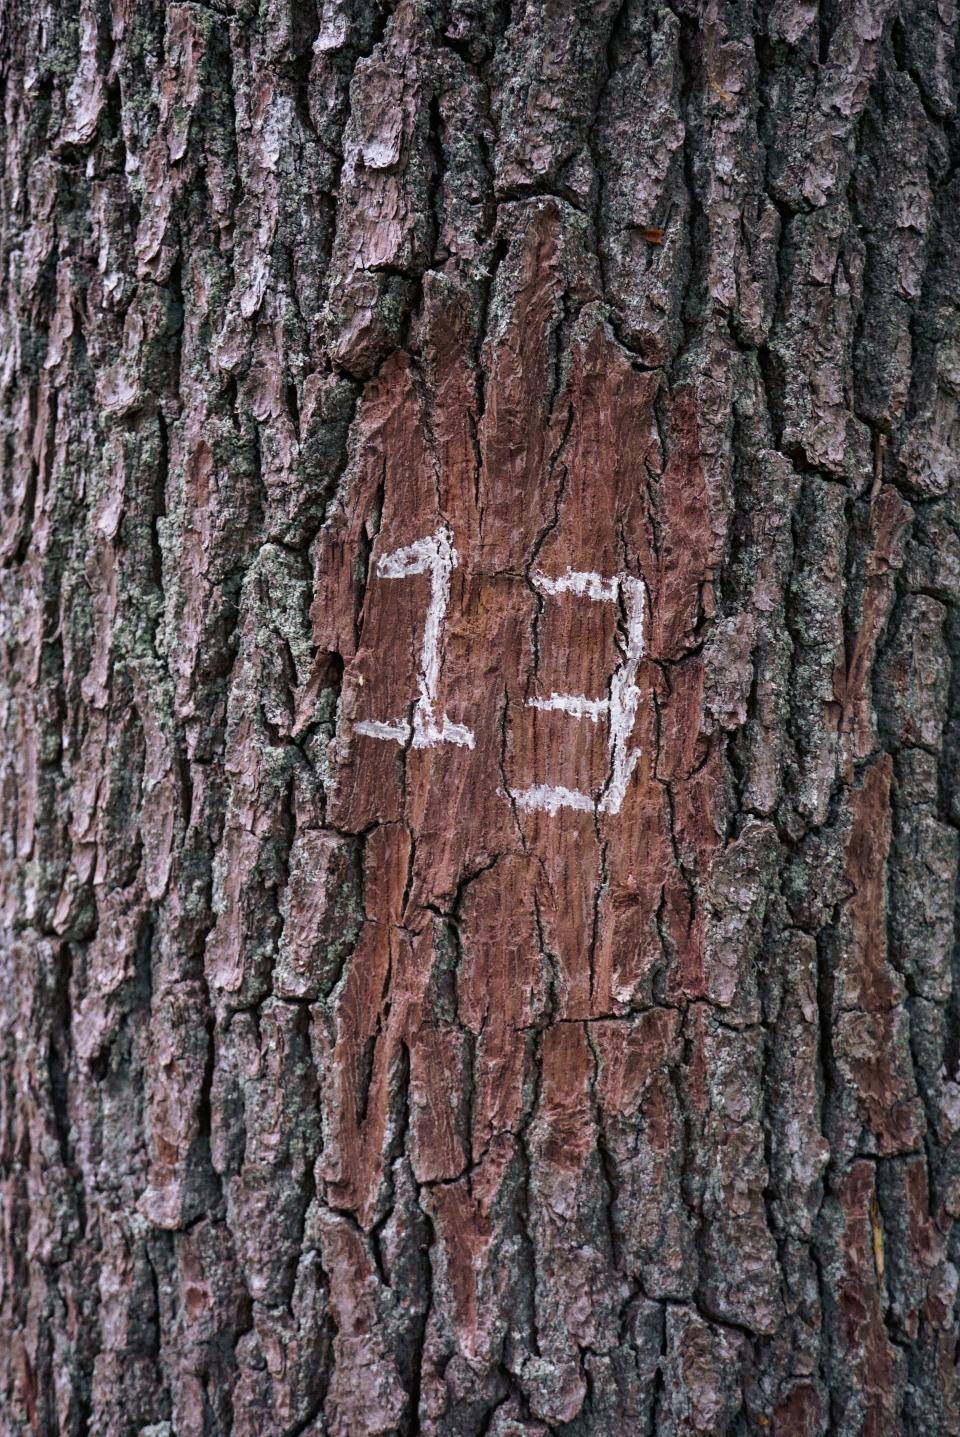 the number 13 written on a tree trunk